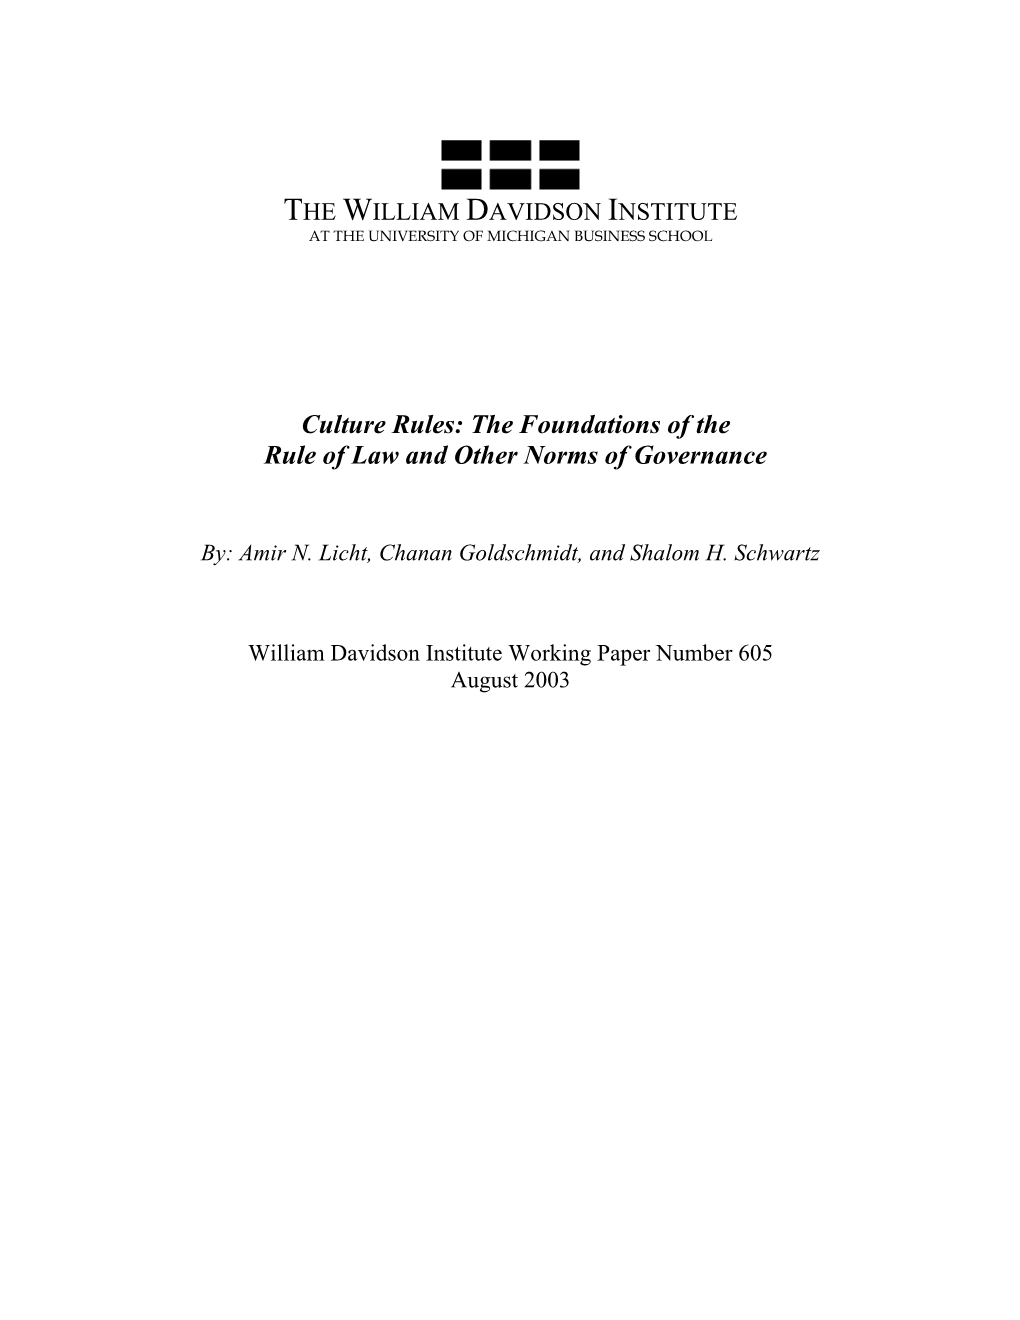 The Foundations of the Rule of Law and Other Norms of Governance